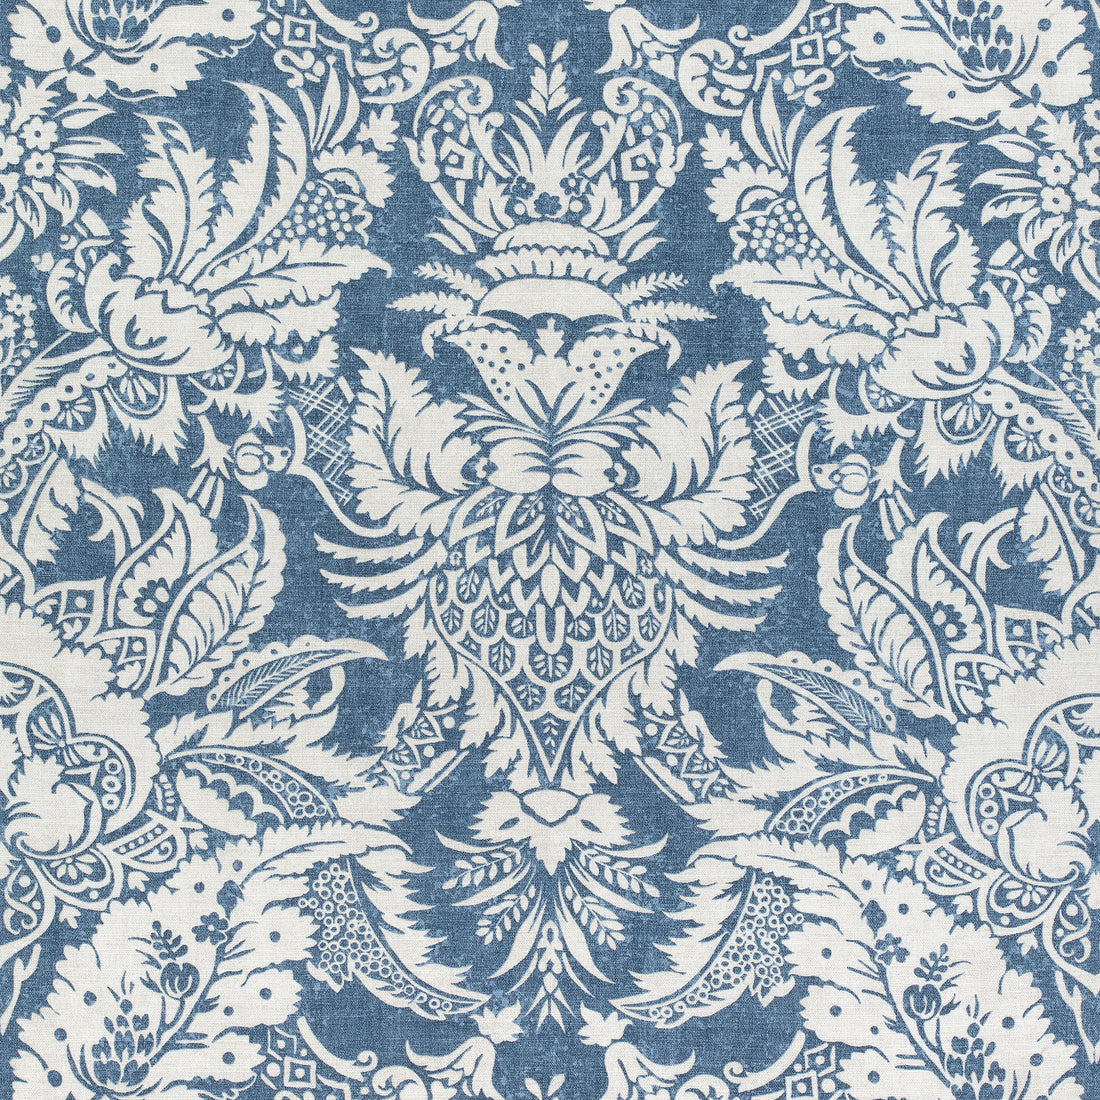 Chardonnet Damask fabric in navy color - pattern number F972583 - by Thibaut in the Chestnut Hill collection